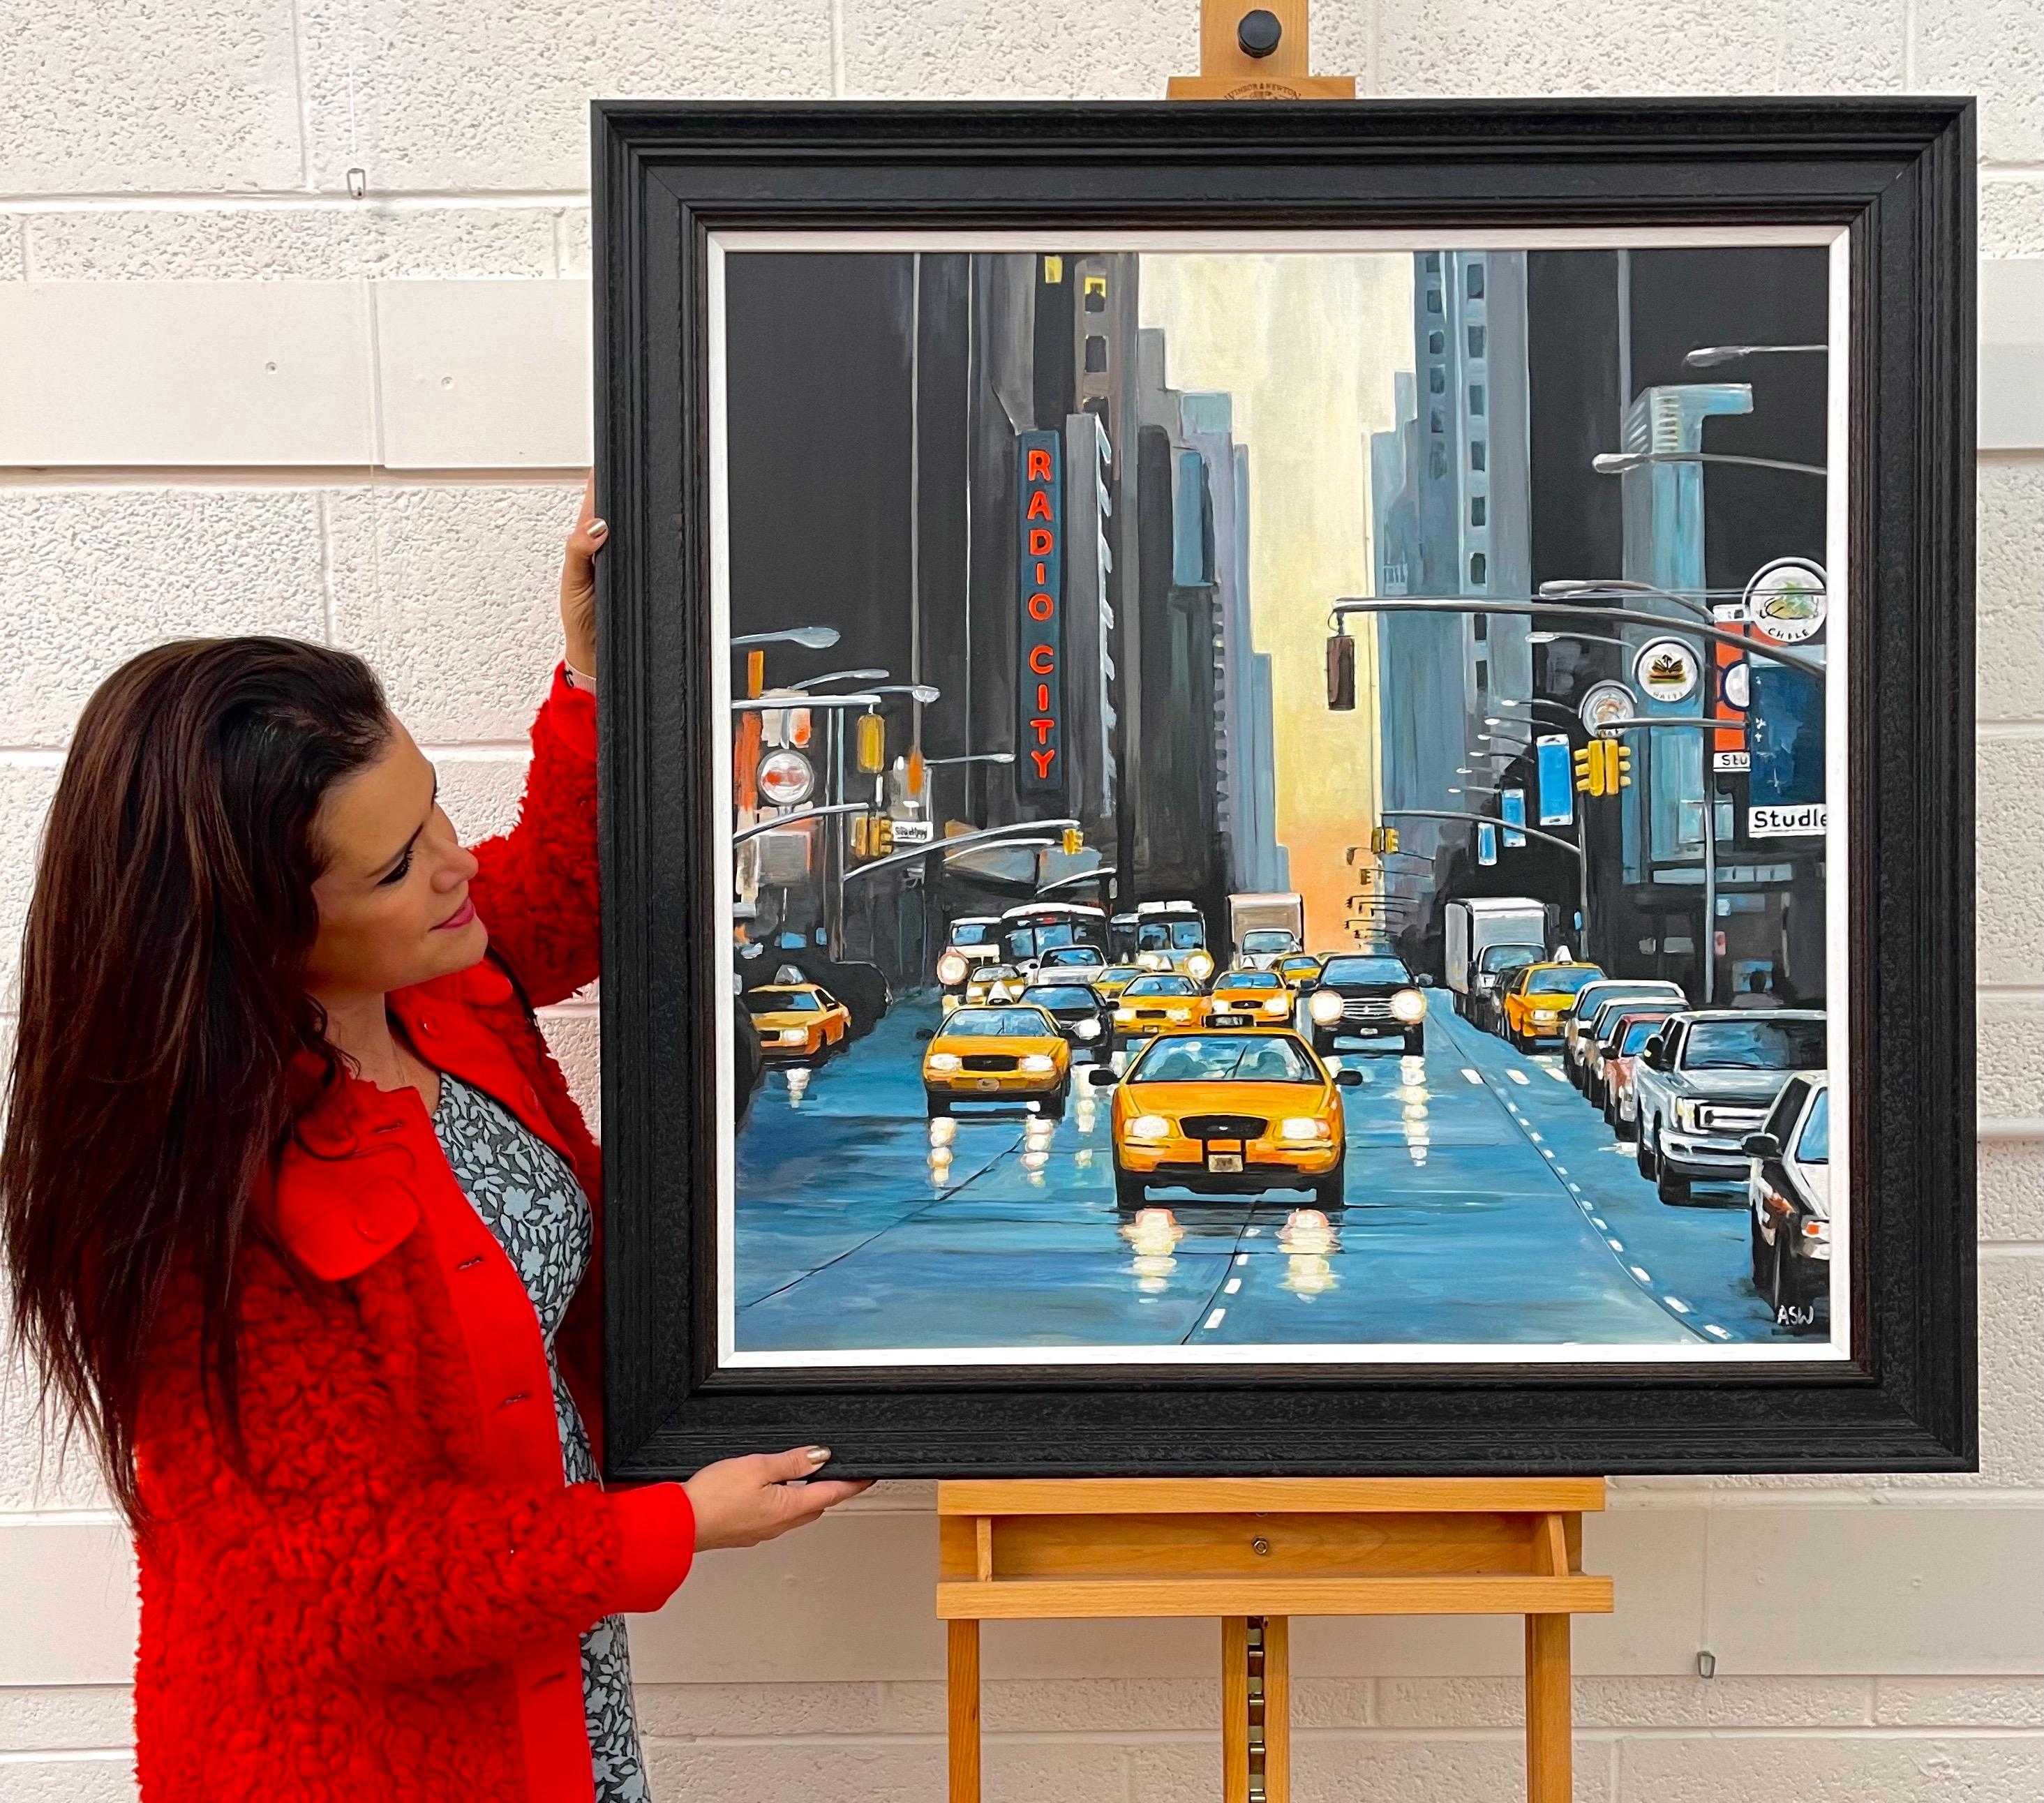 Radio City New York NYC Sunset by Contemporary British Urban Landscape Artist - Painting by Angela Wakefield